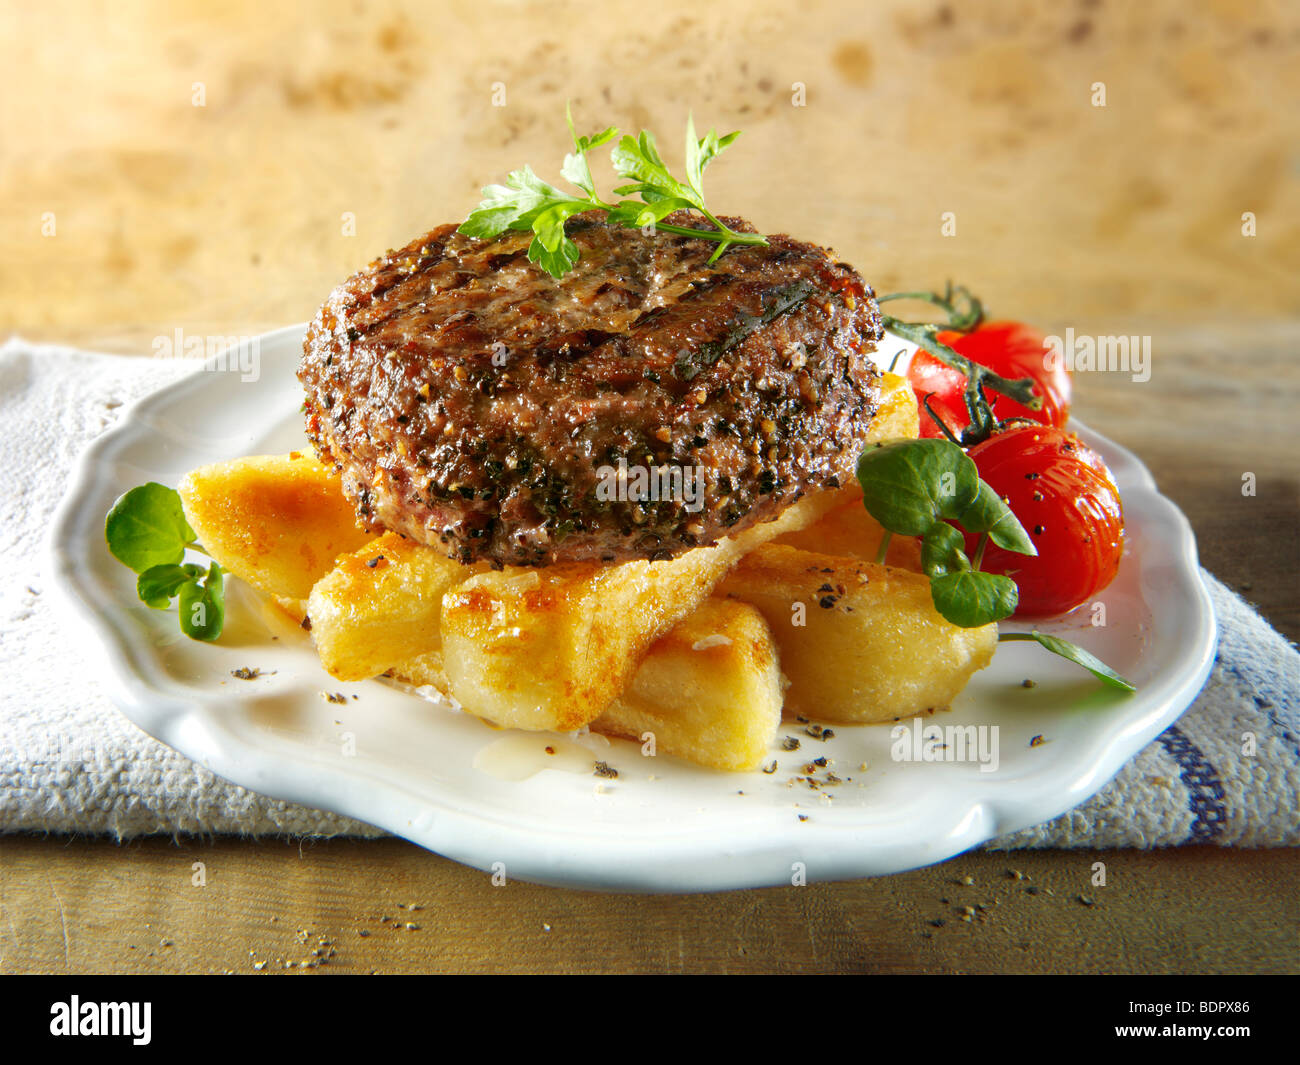 Peppered beef burger with chips Stock Photo